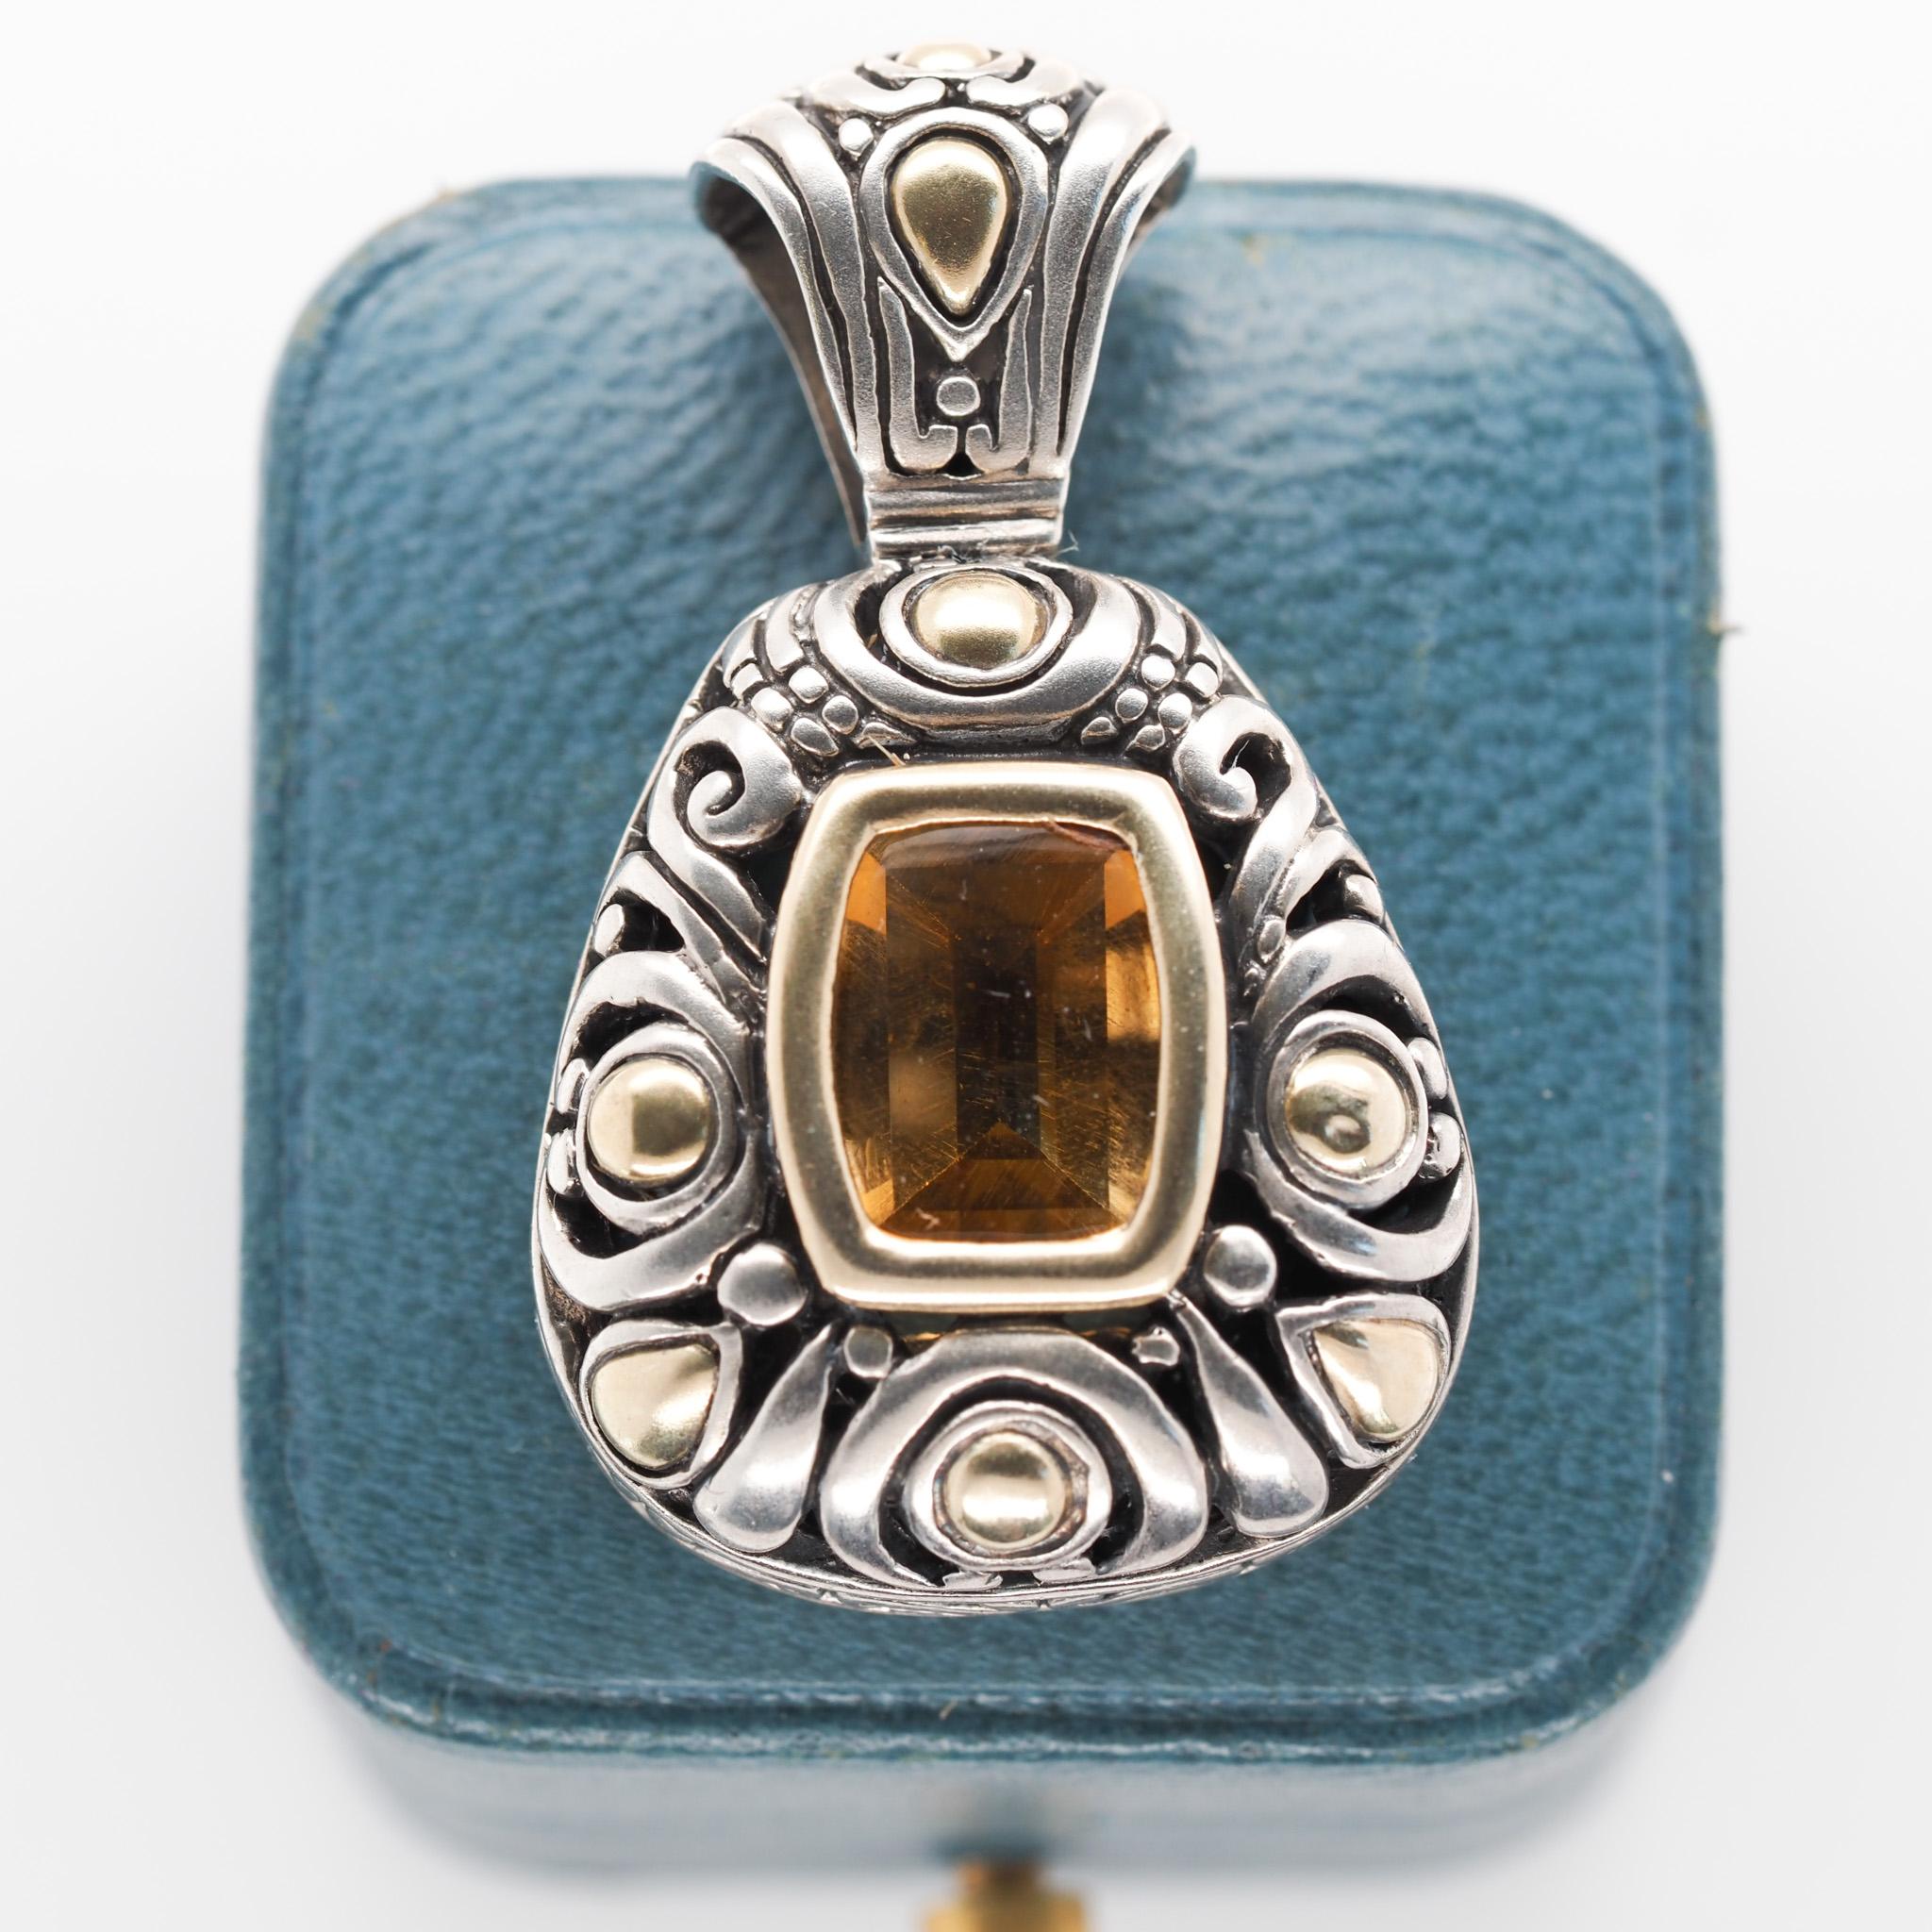 Metal Type: 18K Yellow Gold & Sterling Silver [Hallmarked, and Tested]
Weight: 12.2 grams
Diamond Details:
Measurement: 1.5 inch long
Condition: Excellent